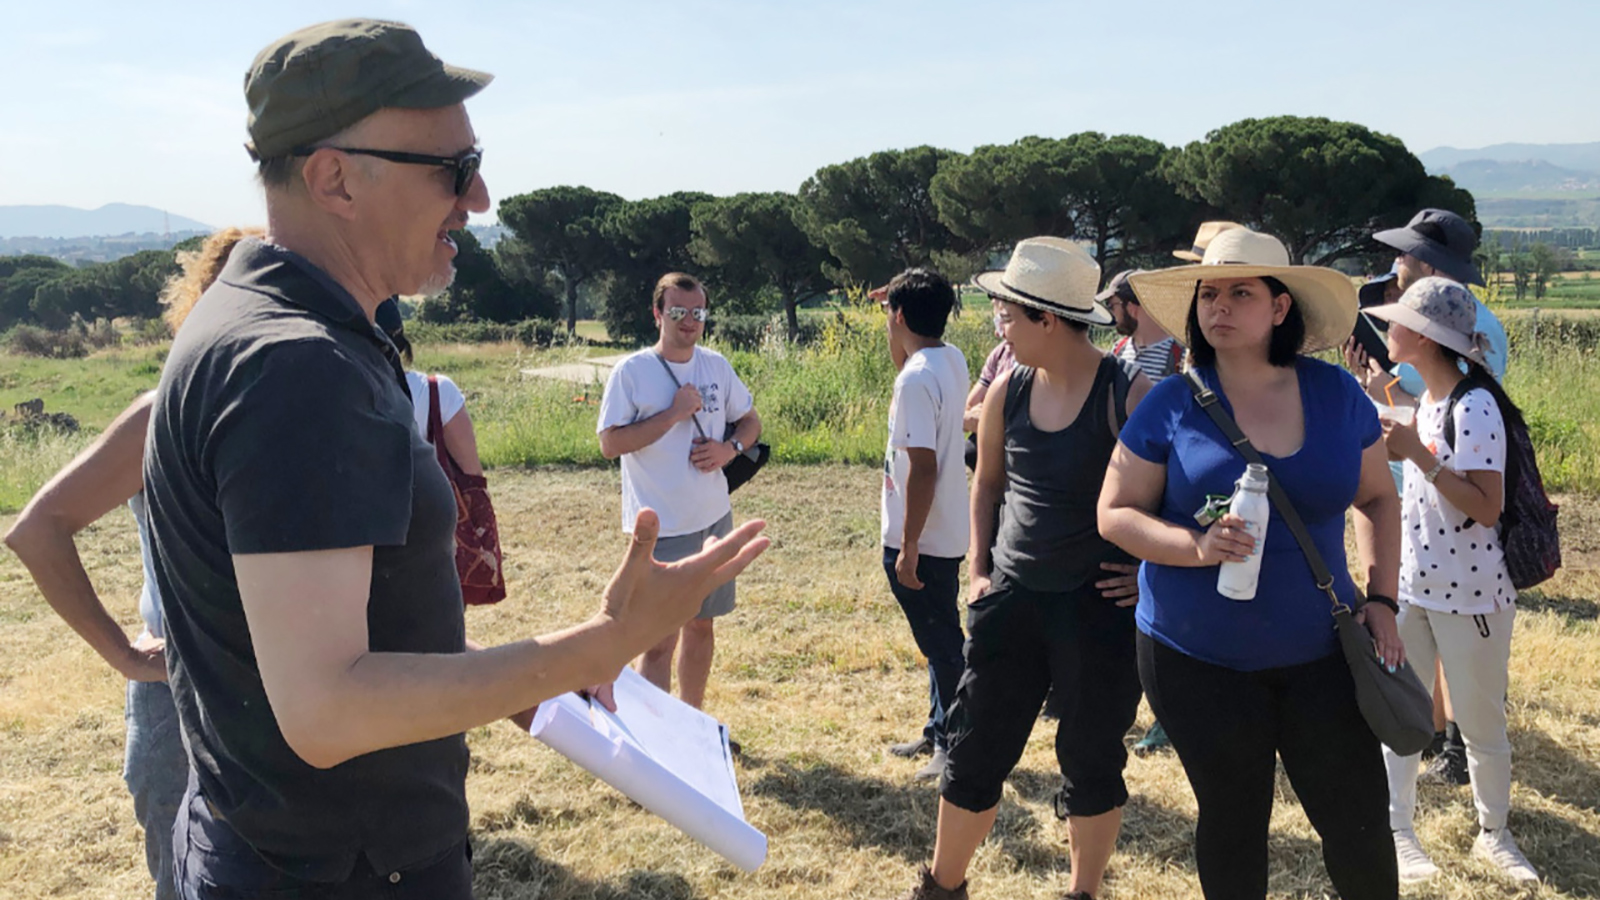 A man on the left speaks to a group of people on the right in an outdoor location at Gabii, Italy